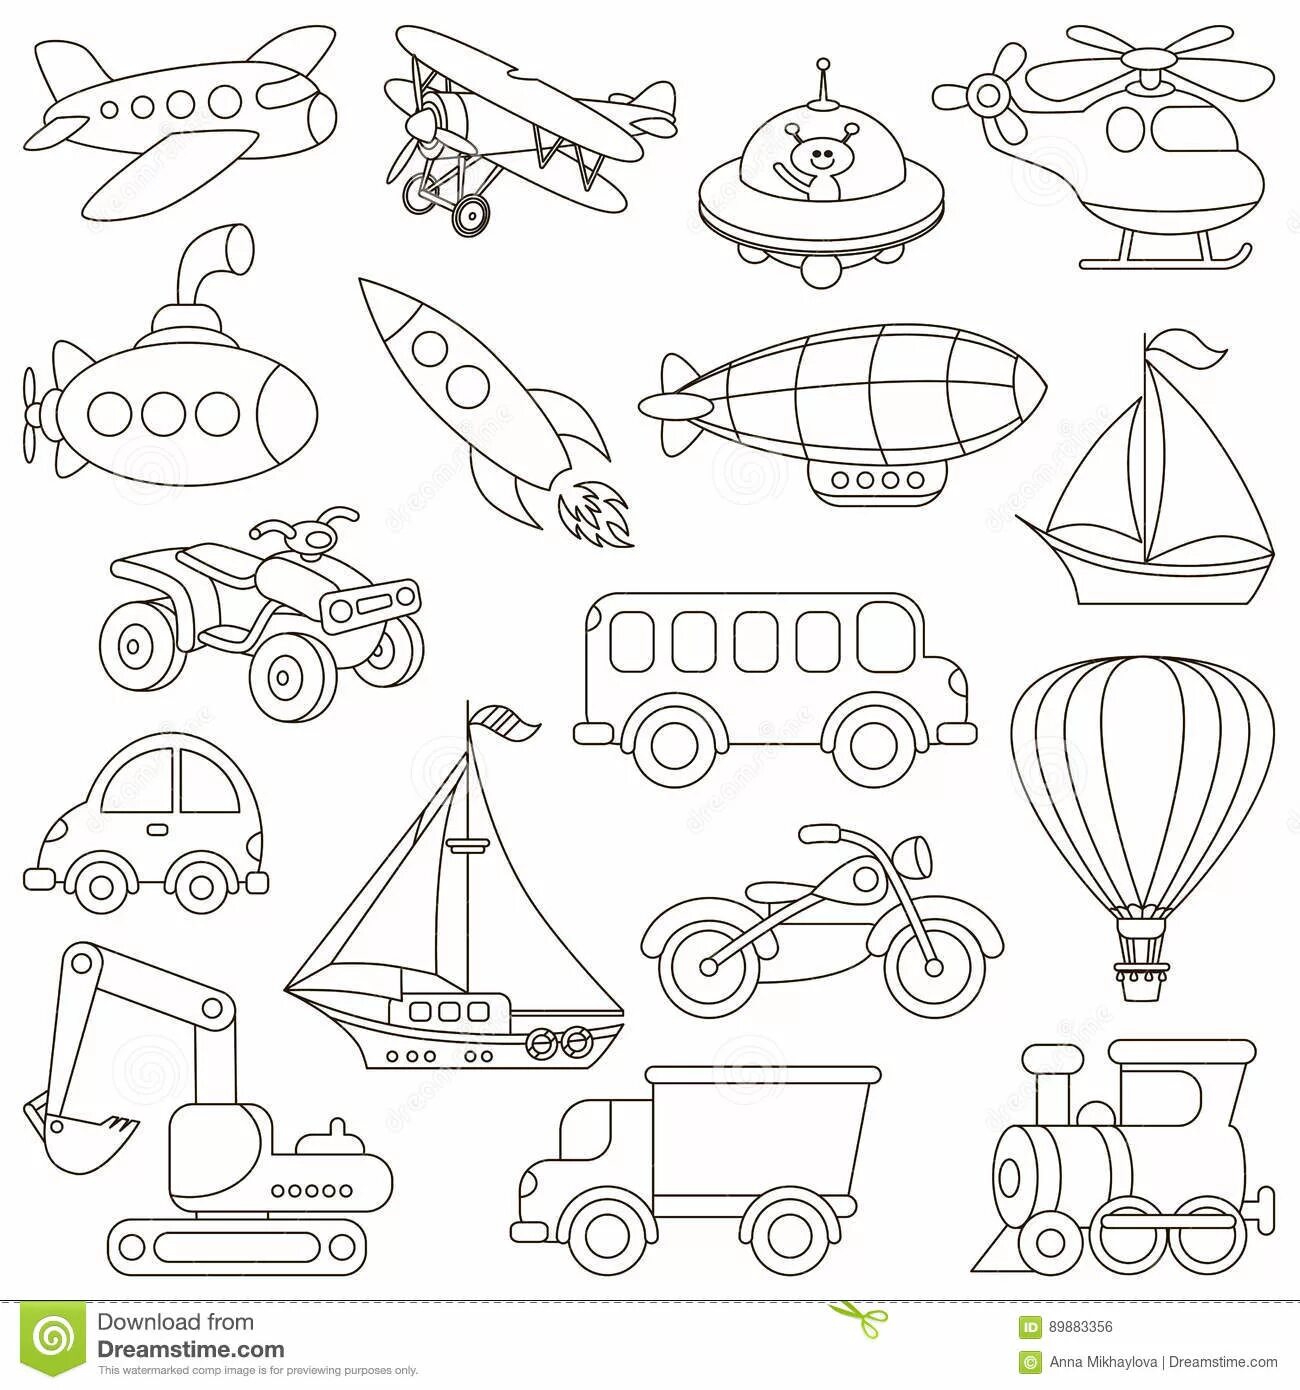 Adorable tram coloring book for kids 6-7 years old